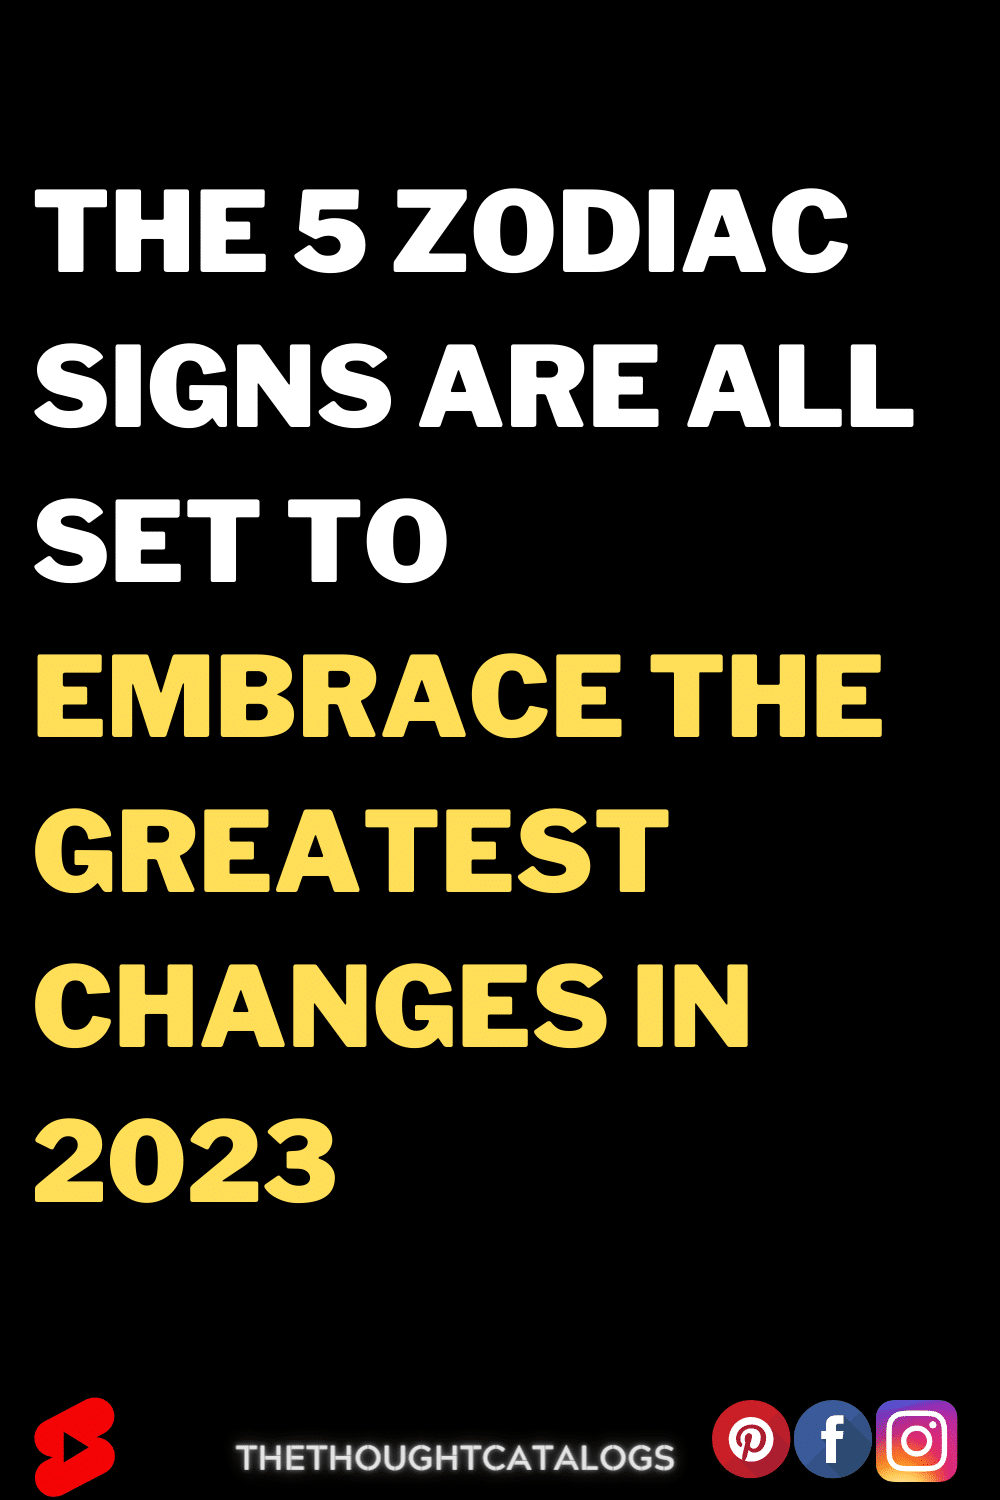 The 5 Zodiac Signs Are All Set To Embrace The Greatest Changes In 2023